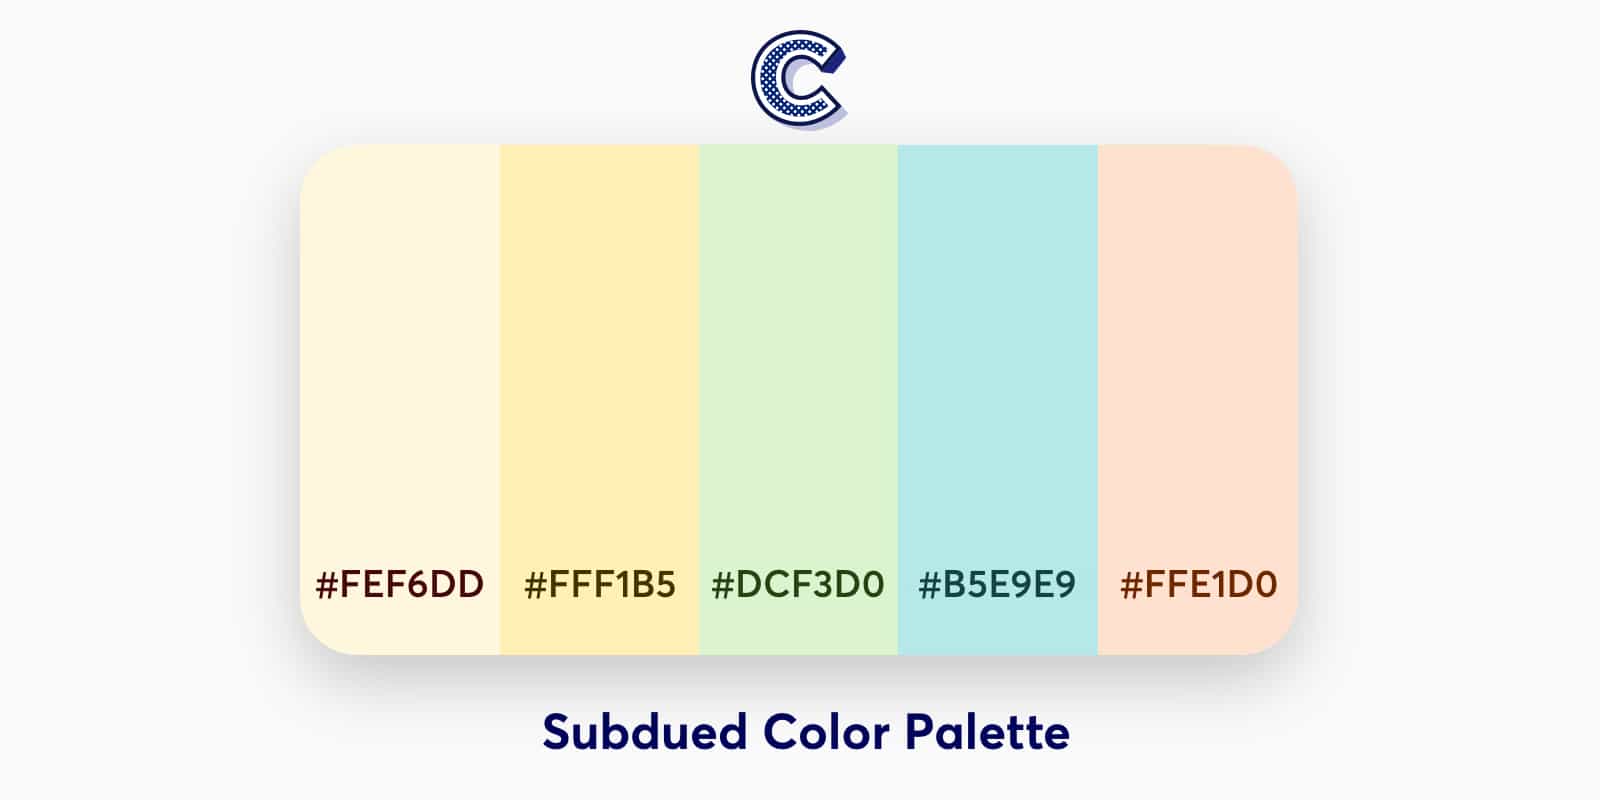 the featured image of subdued color palette